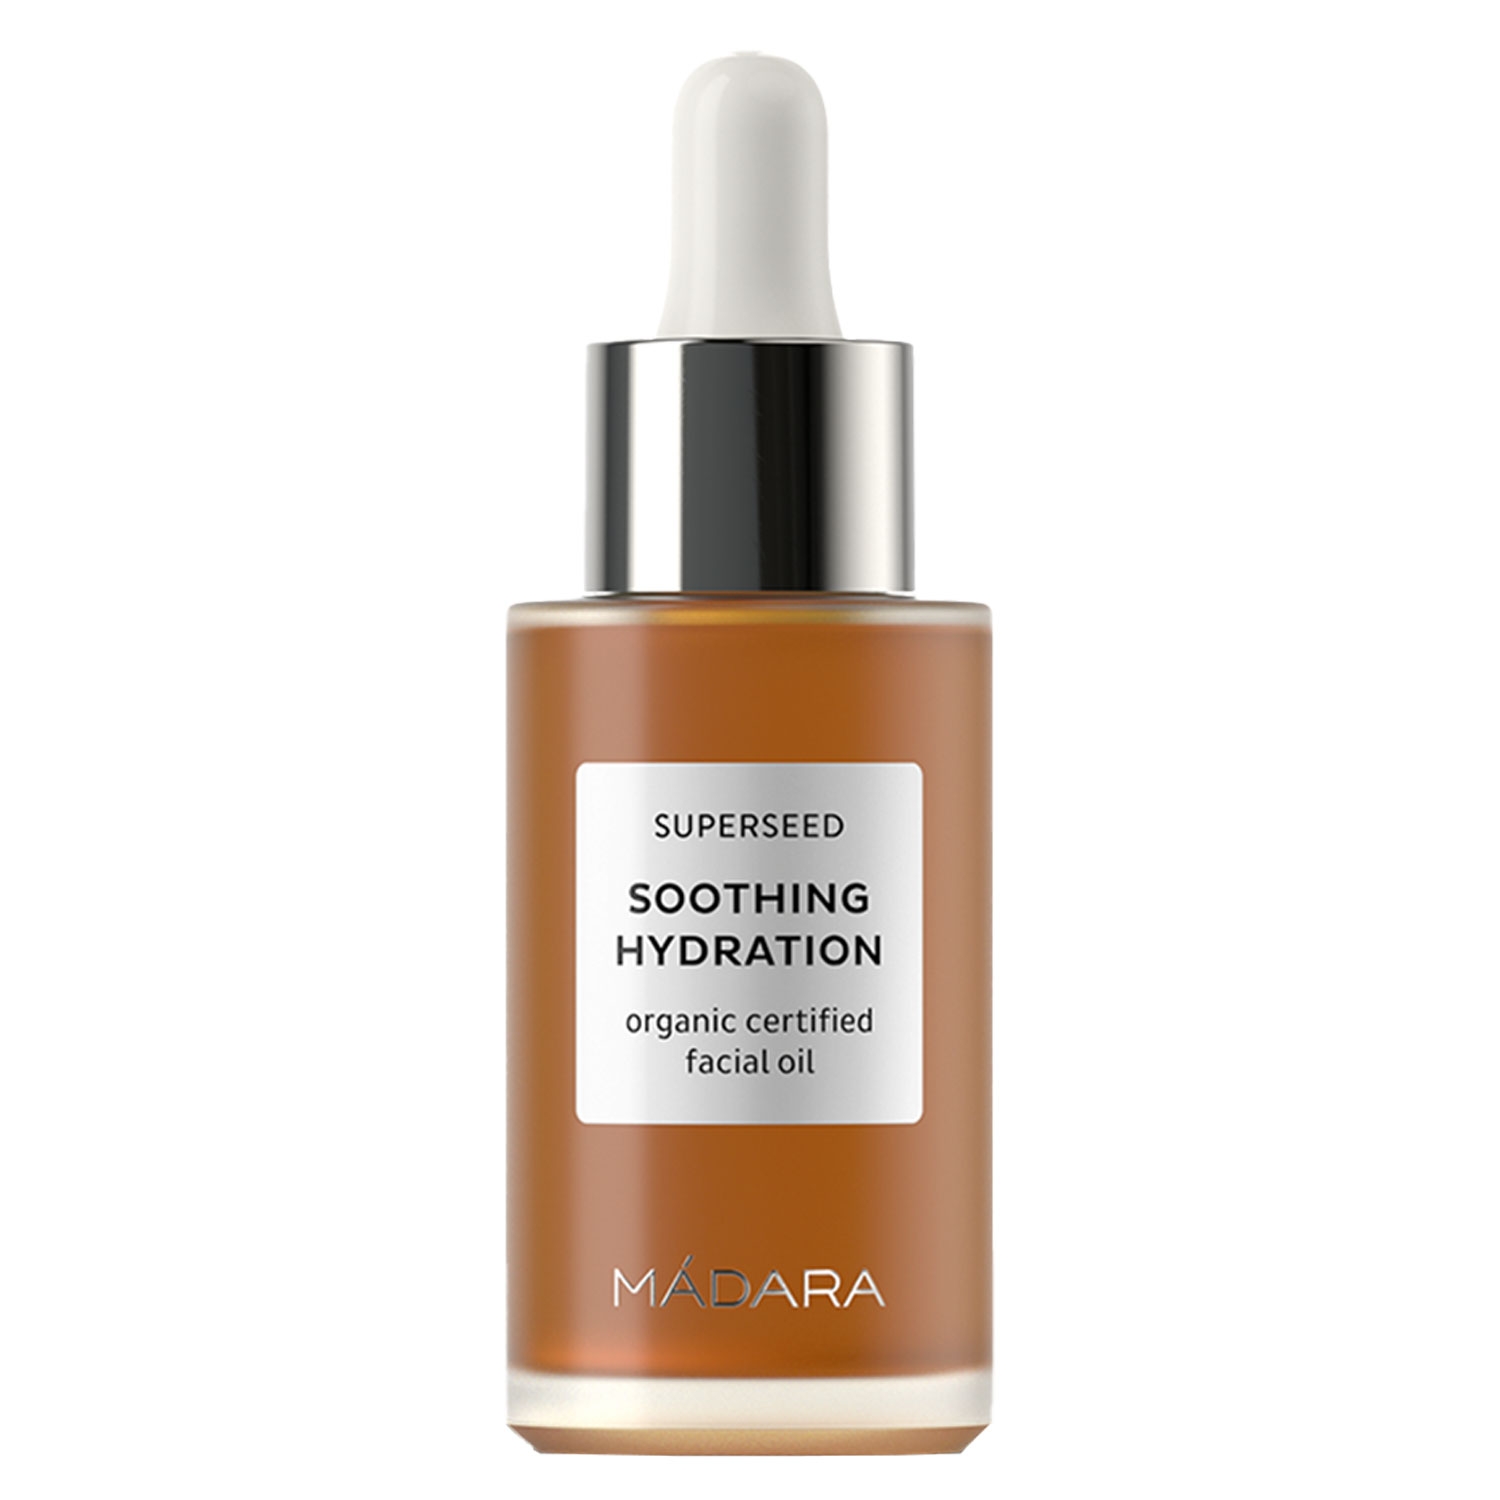 Produktbild von MÁDARA Care - Superseed Soothing Hydration Facial Oil